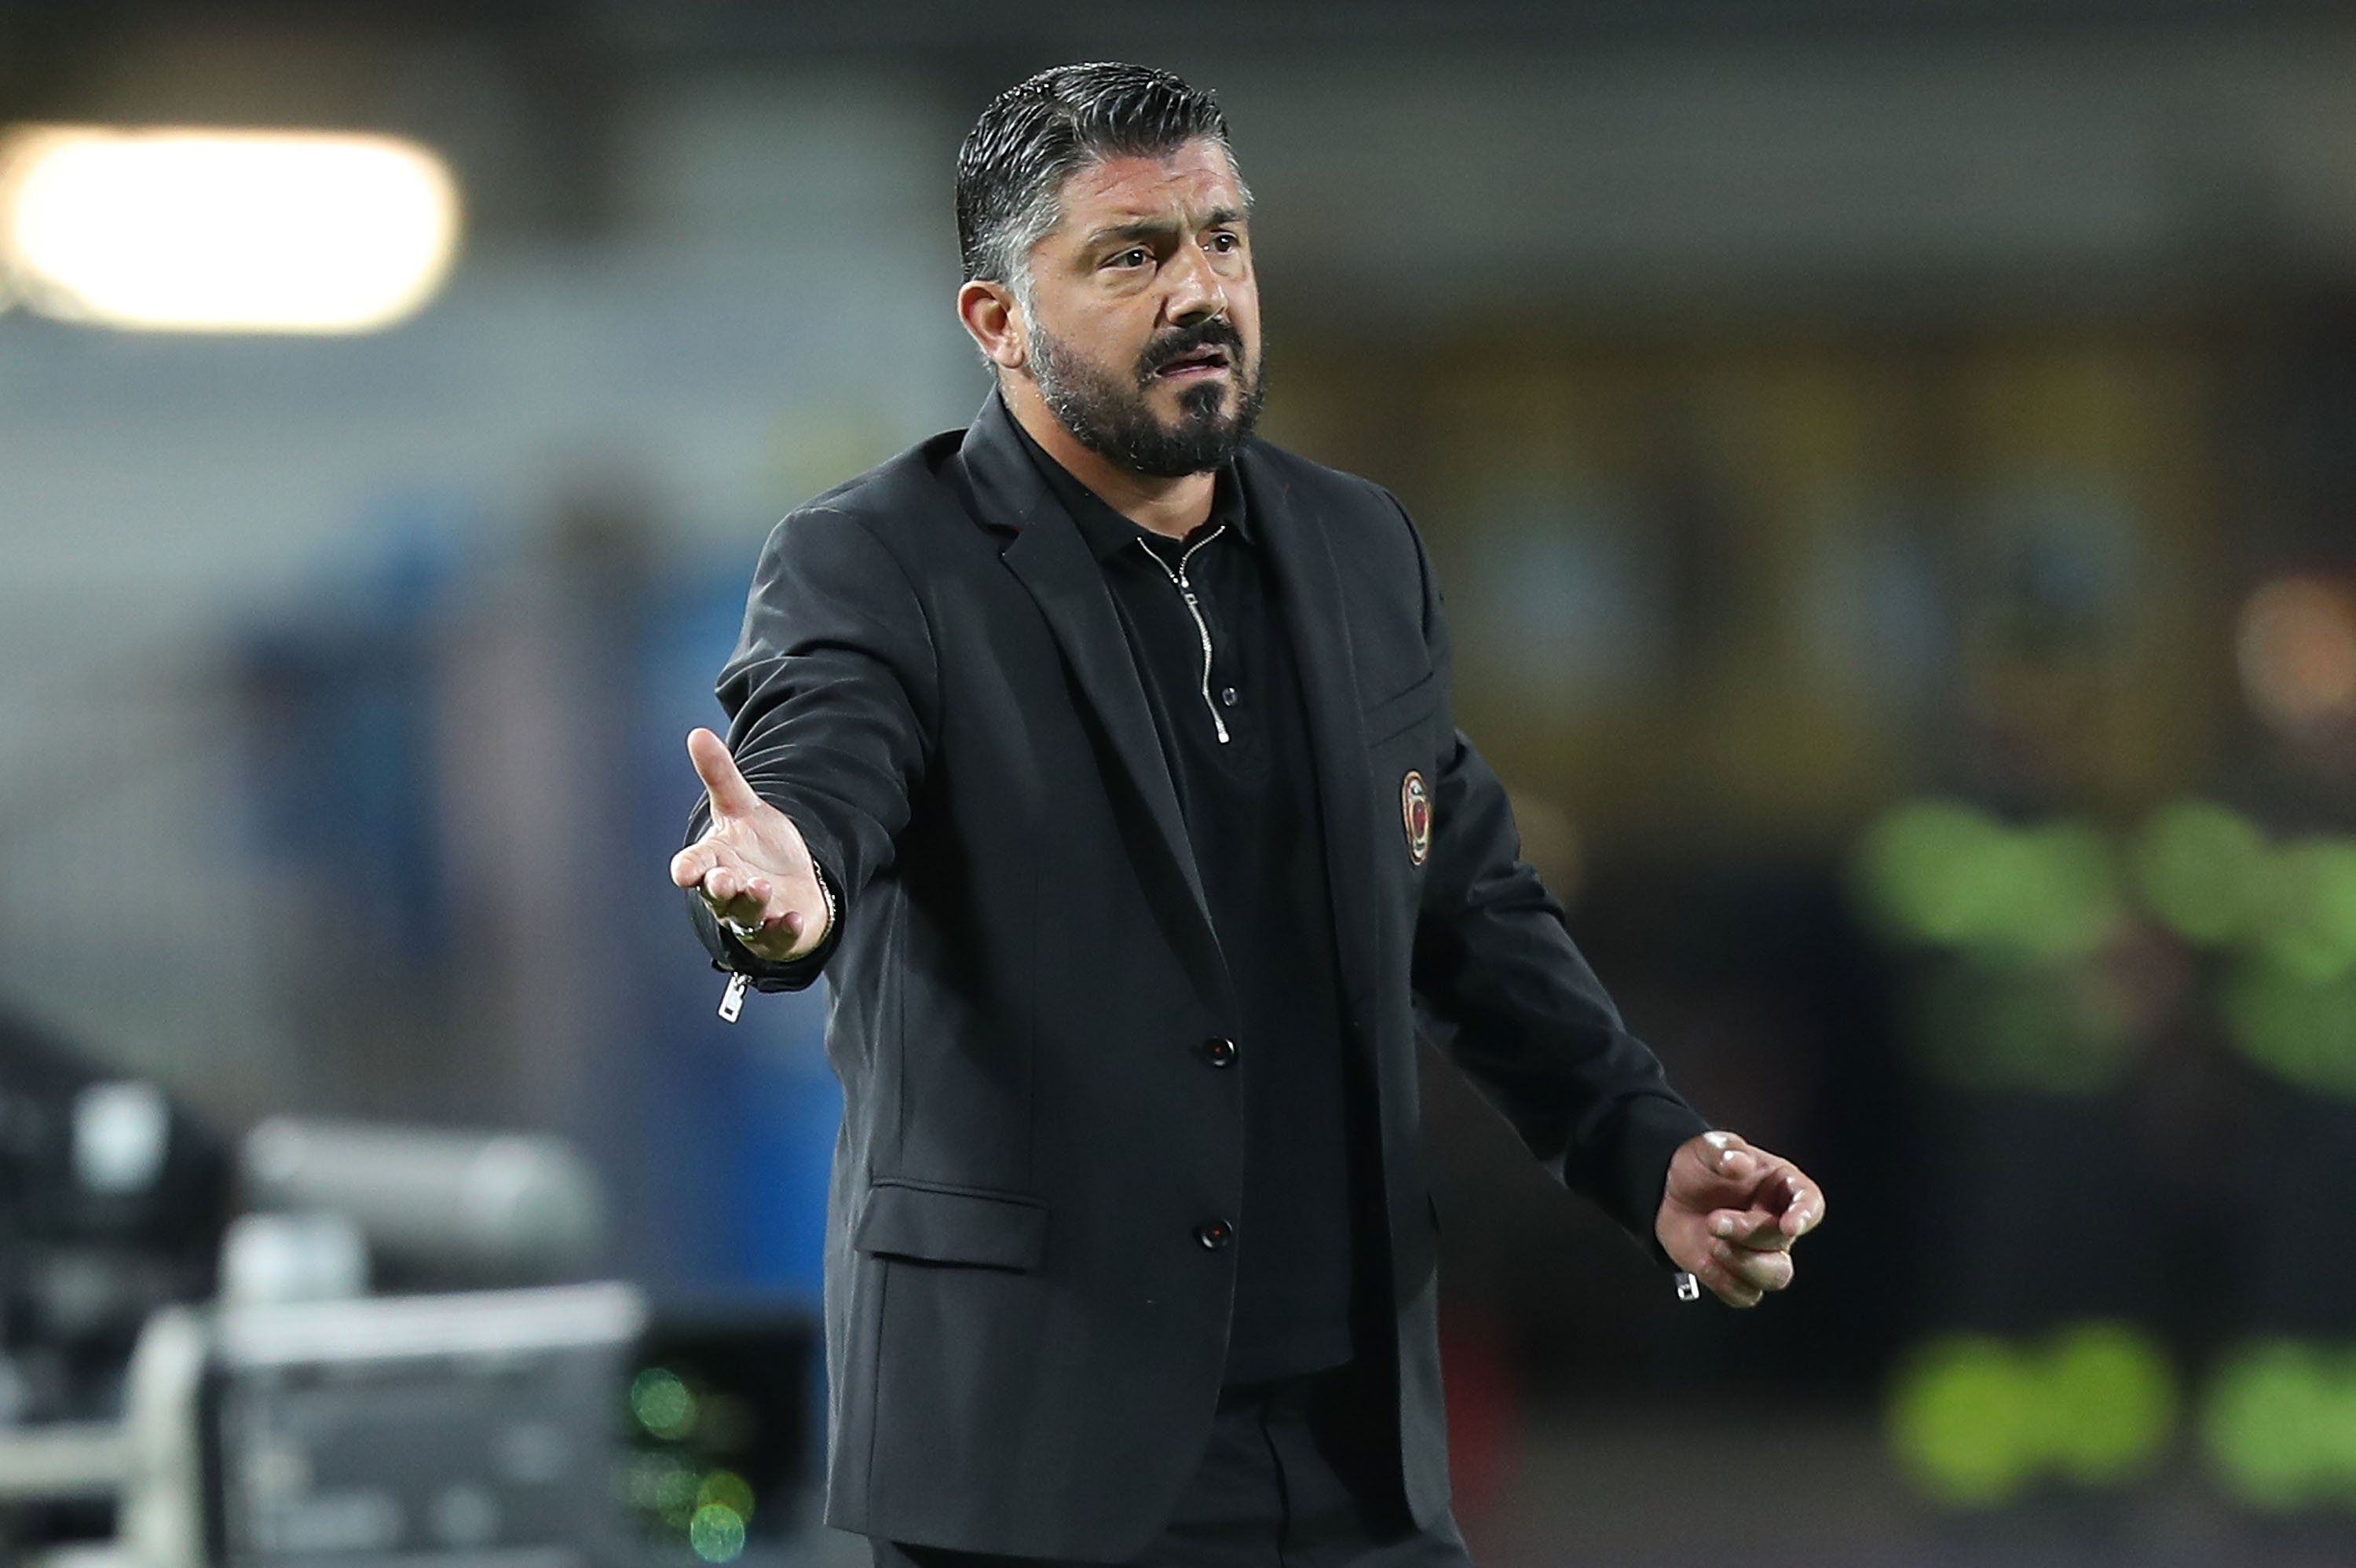 EMPOLI, ITALY - SEPTEMBER 27: Gennaro Gattuso manager of AC Milan gestures during the serie A match between Empoli and AC Milan at Stadio Carlo Castellani on September 27, 2018 in Empoli, Italy. (Photo by Gabriele Maltinti/Getty Images)